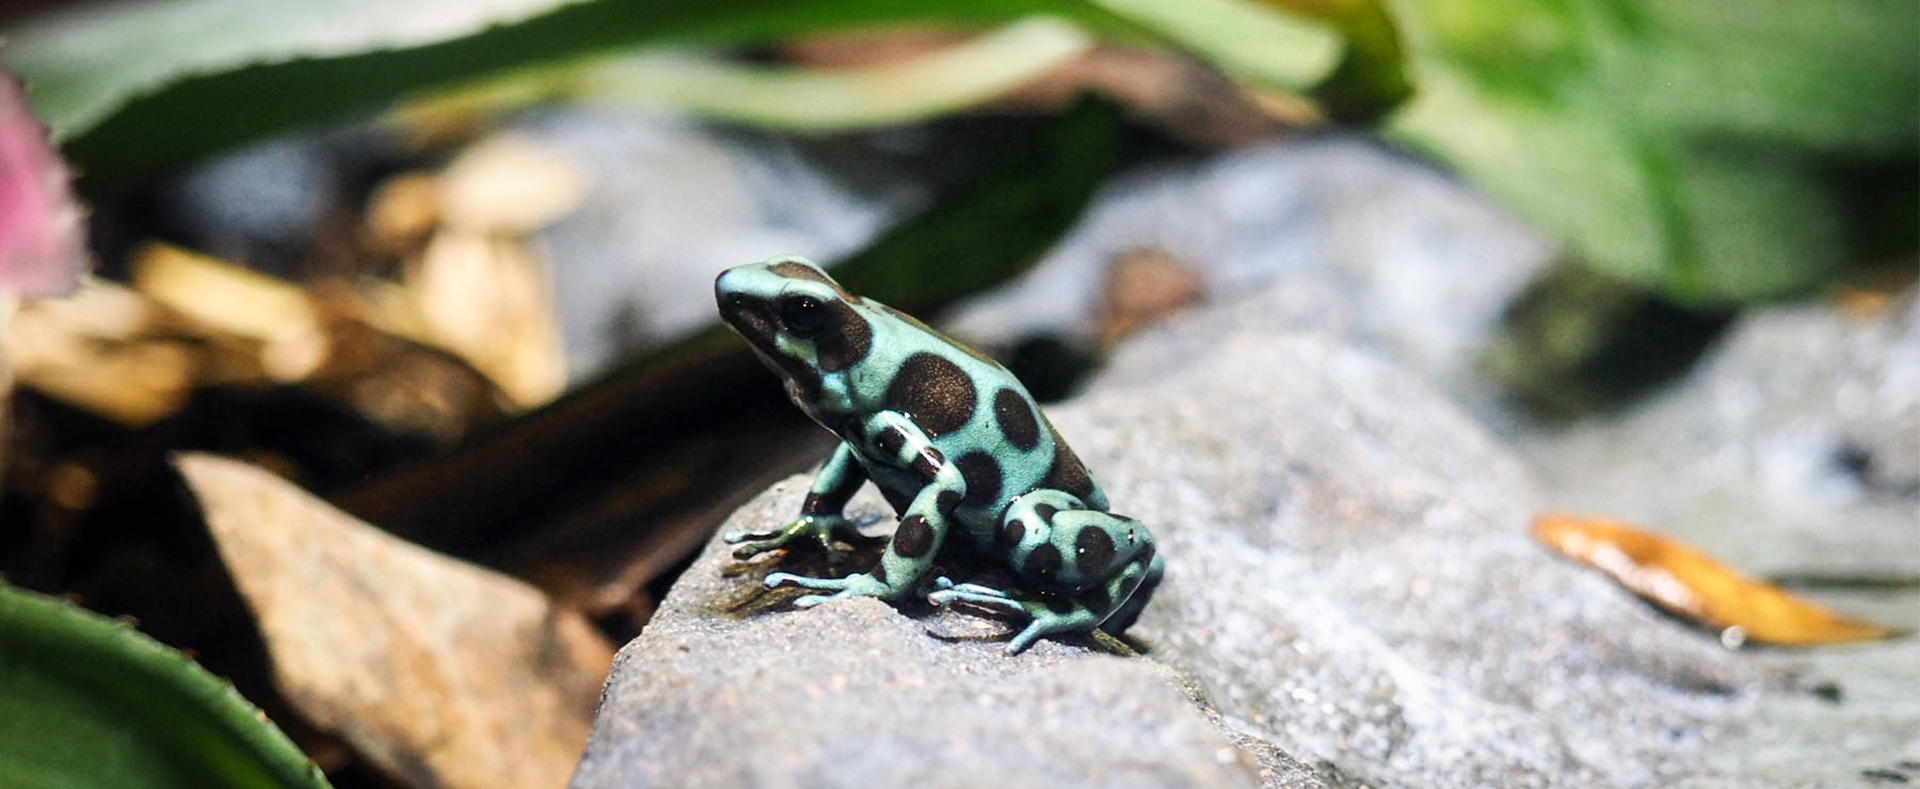 Green and Black Poison Dart Frog - Connecticut's Beardsley Zoo